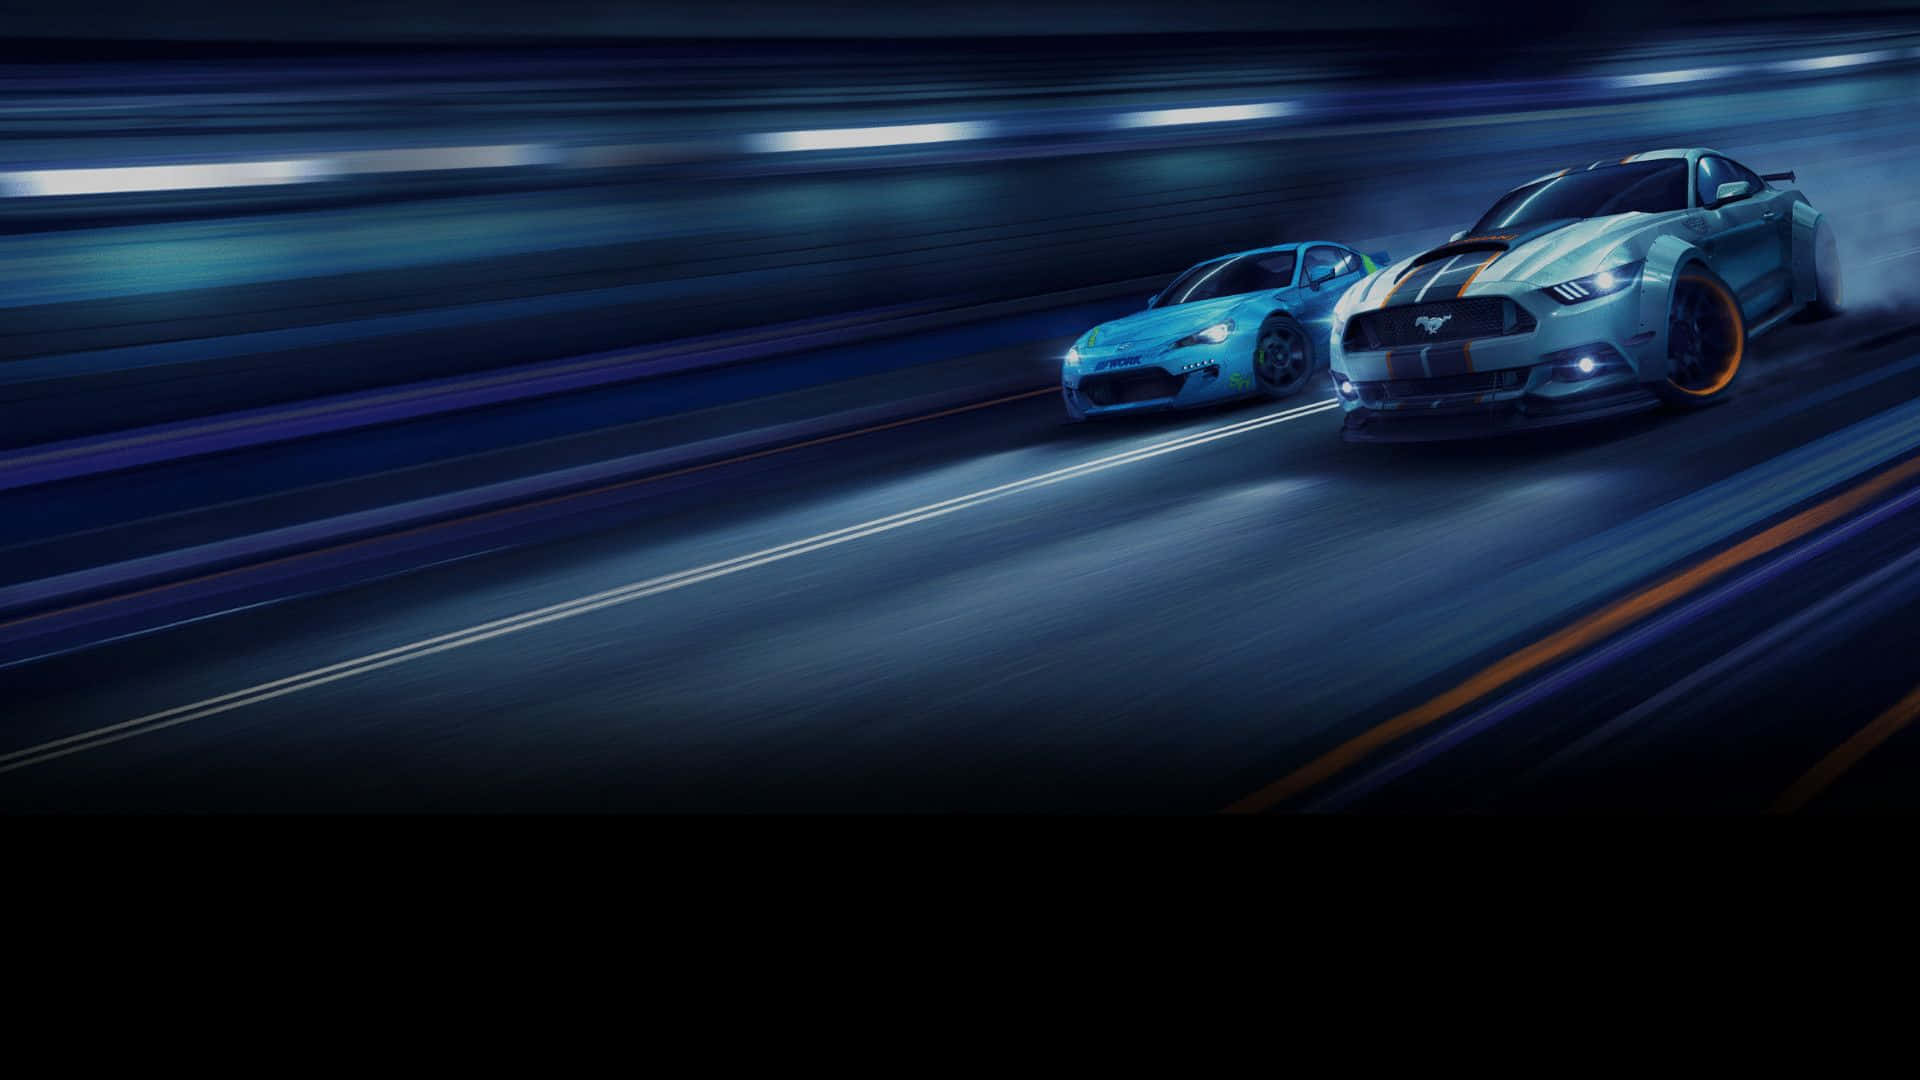 Intense Racing Scene from Need For Speed PC Wallpaper